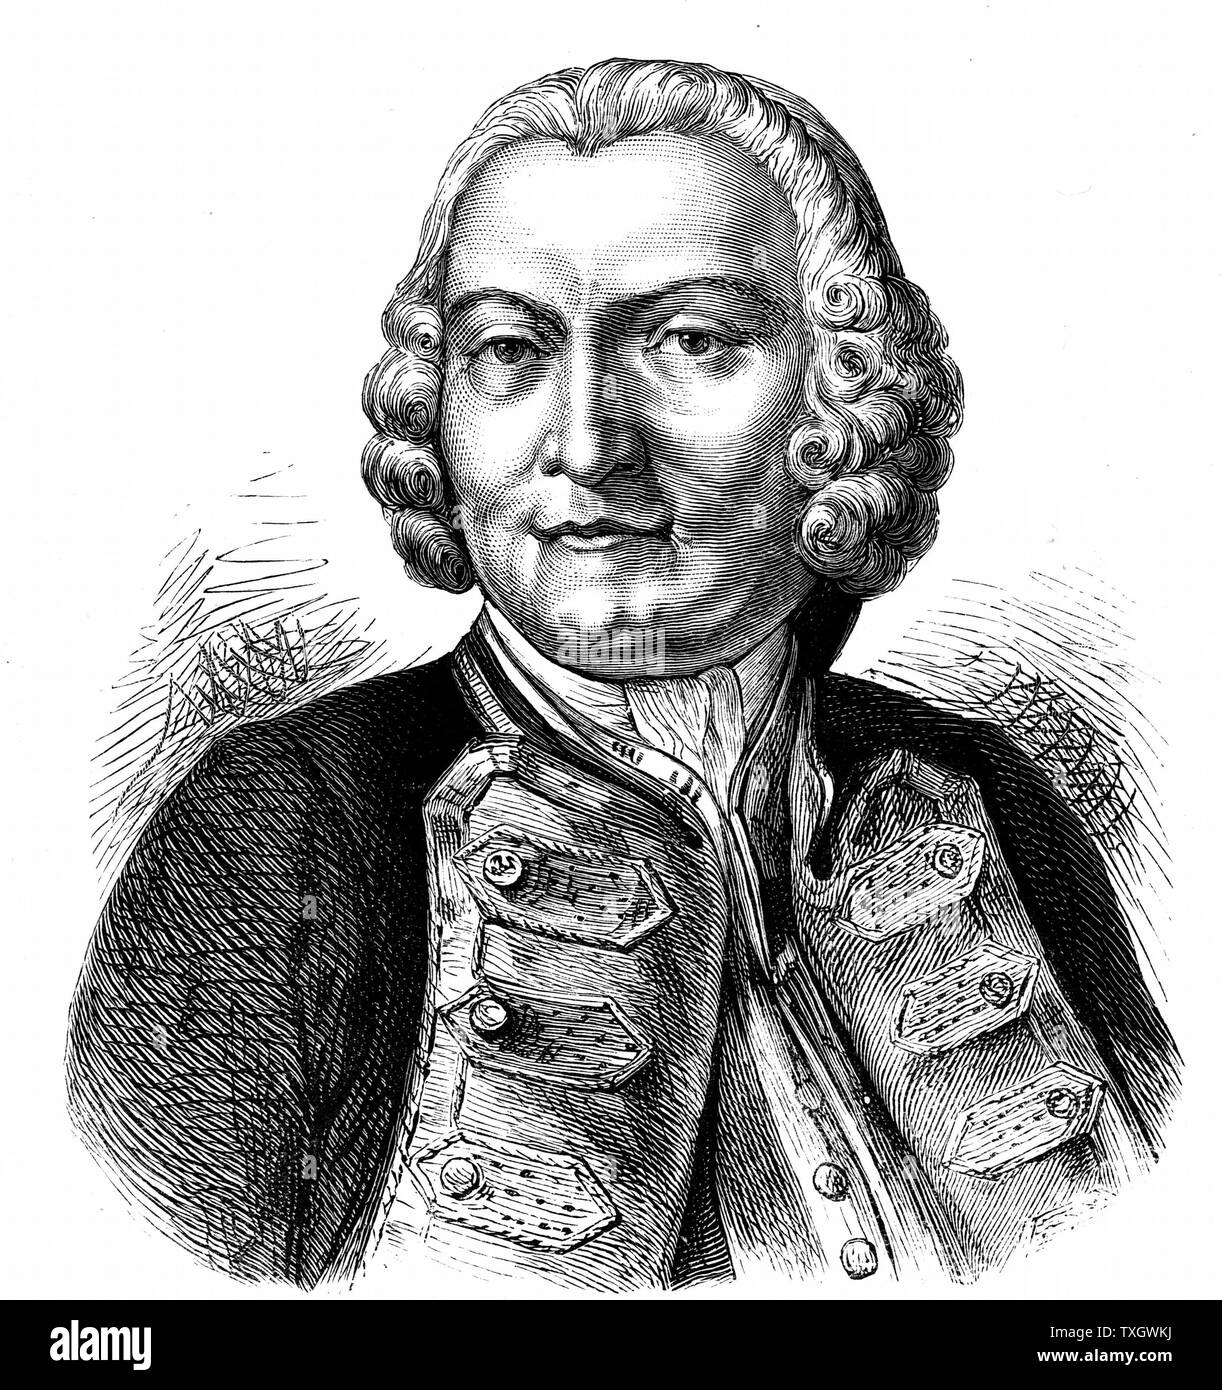 George Anson, Baron Anson (1697-1762) English naval commander. In command of Pacific squadron circumnavigated globe from September 1740 to June 1774. First Lord of the Admiralty 1751 Engraving Stock Photo